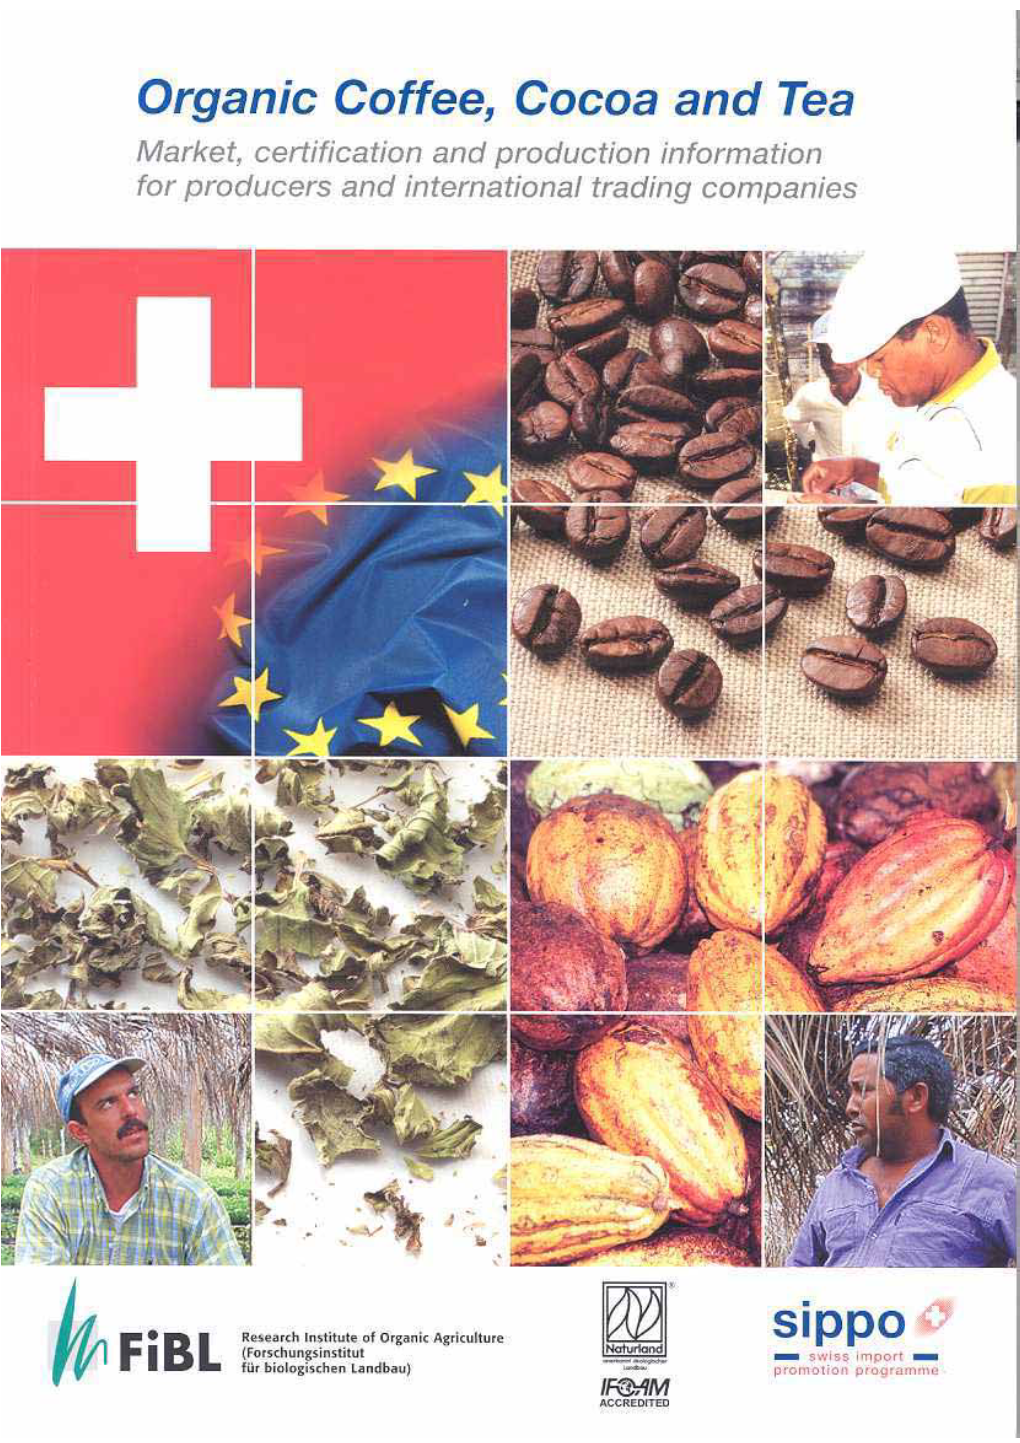 Part A: Market of Organic Coffee, Cocoa and Tea